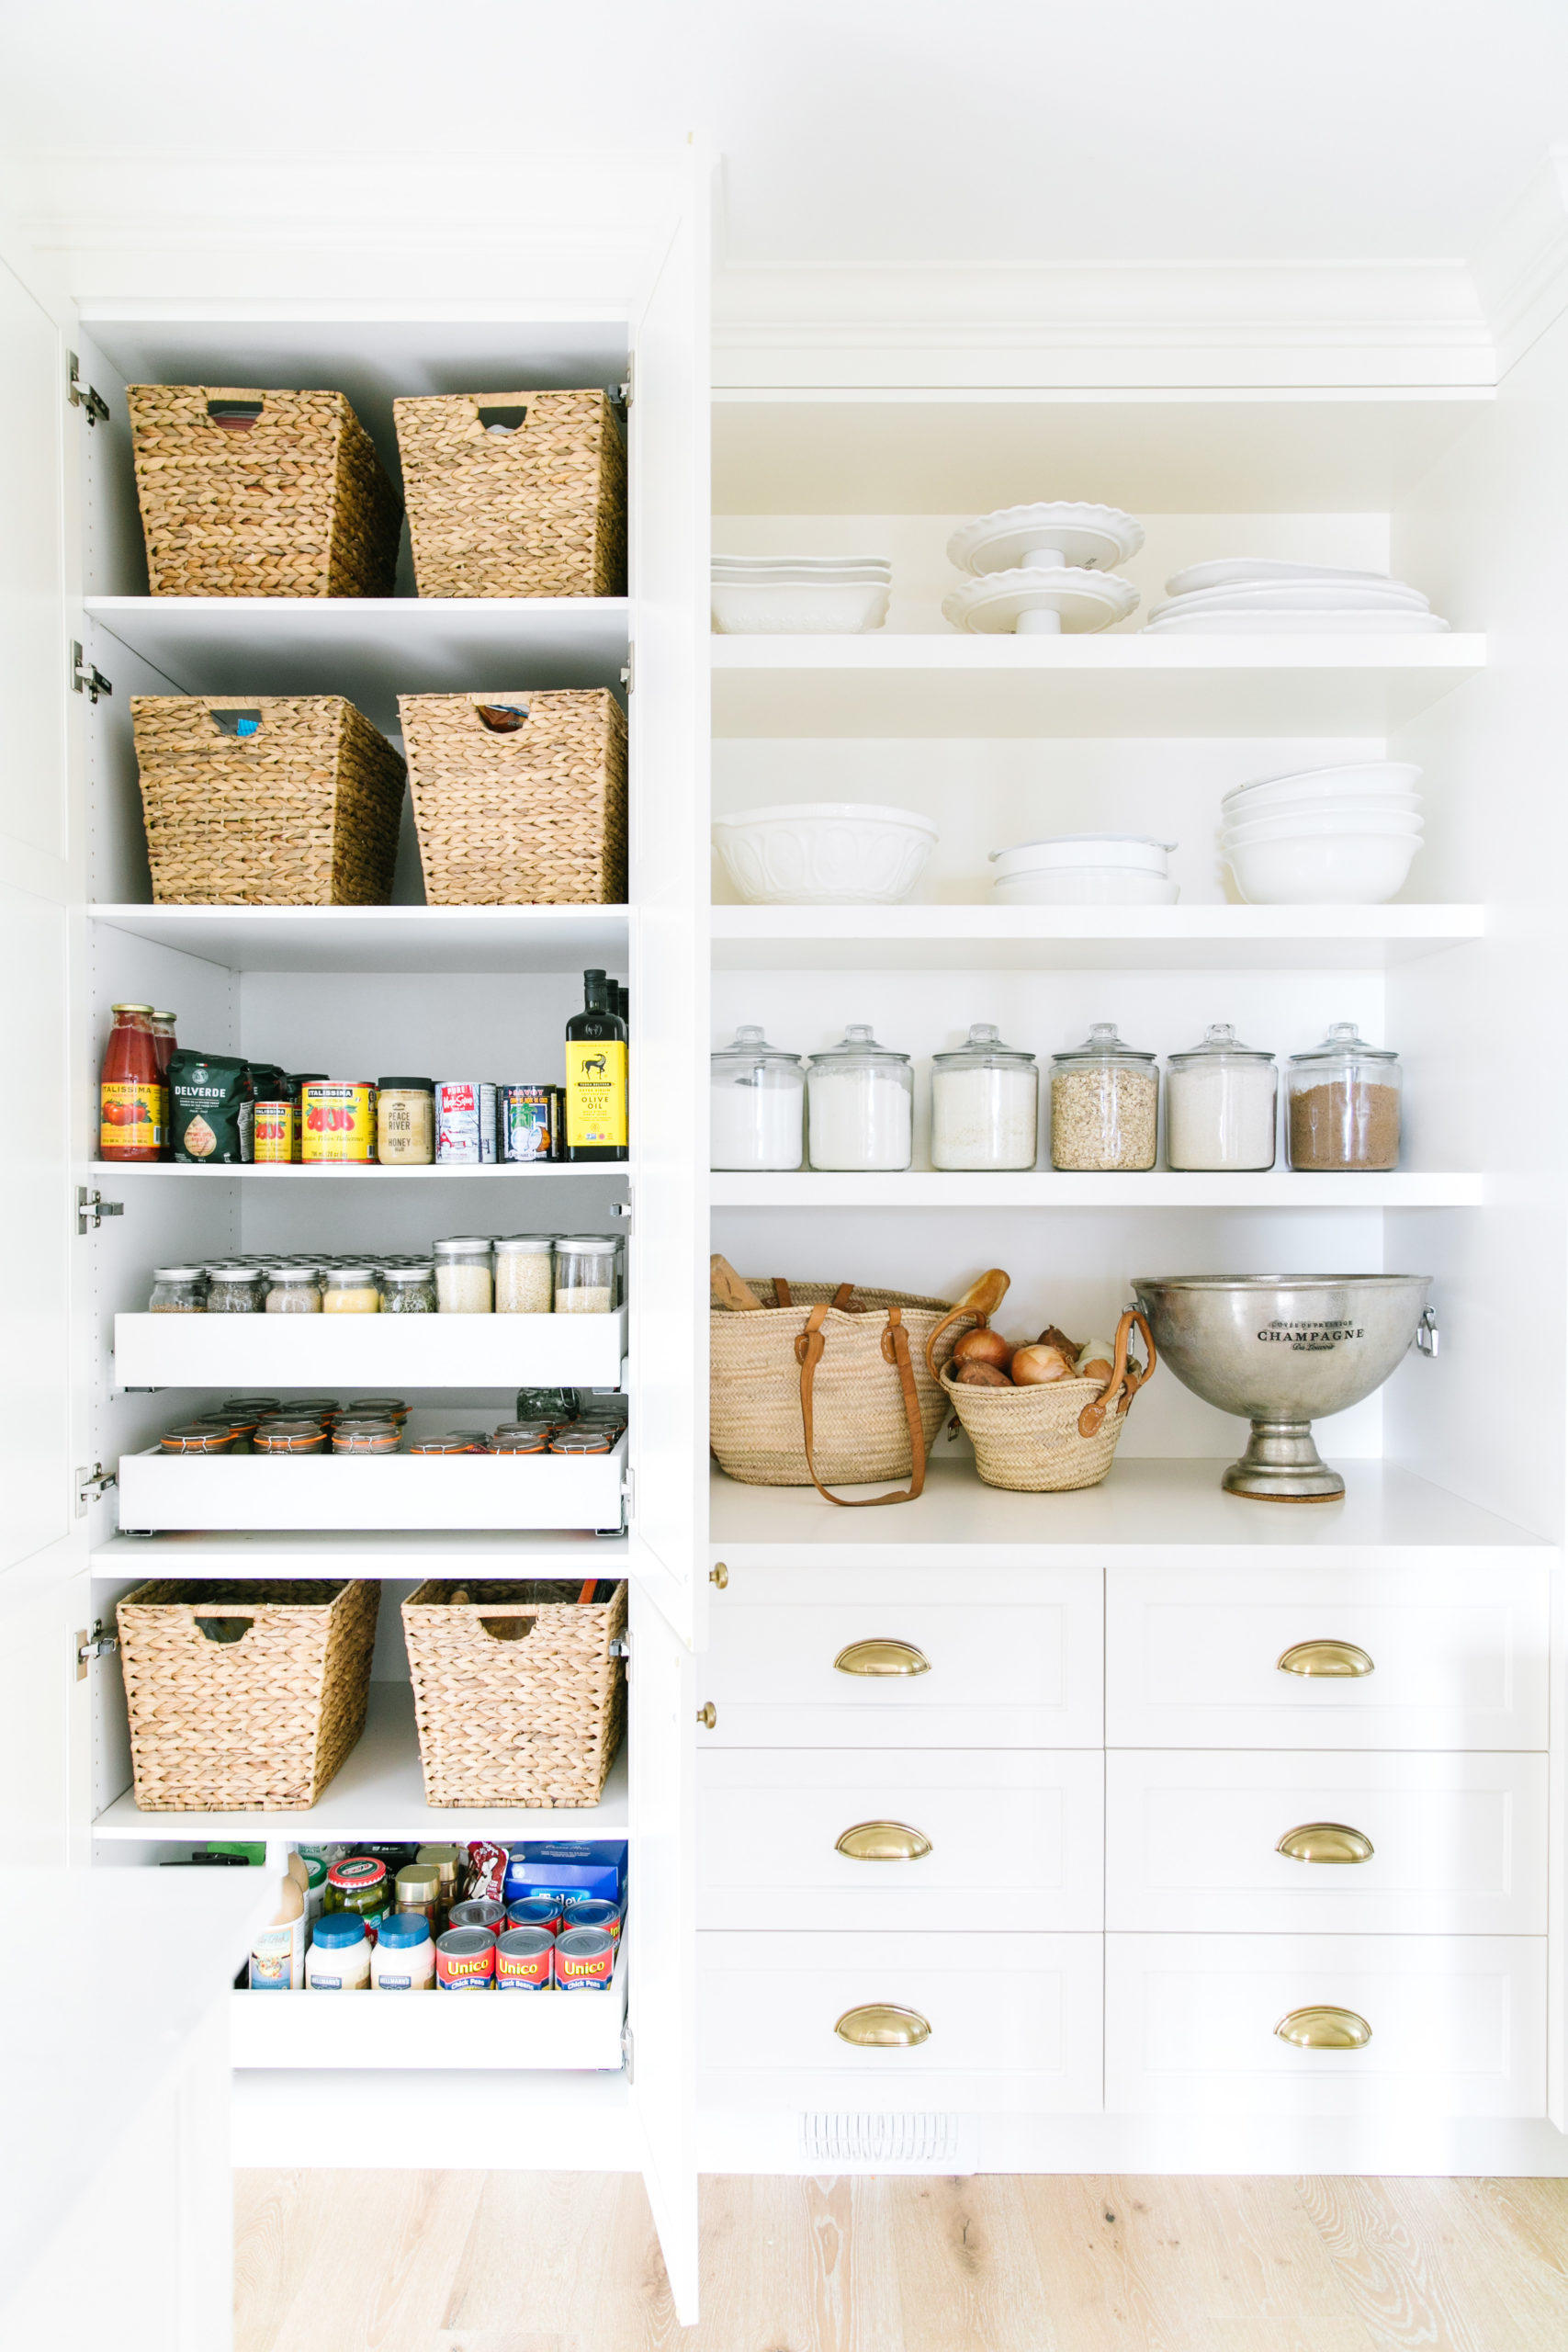 Our white butler's pantry reveal with an arched doorway, vintage chandelier lighting and open shelving with these white bowls, baskets and glass jars for storage!